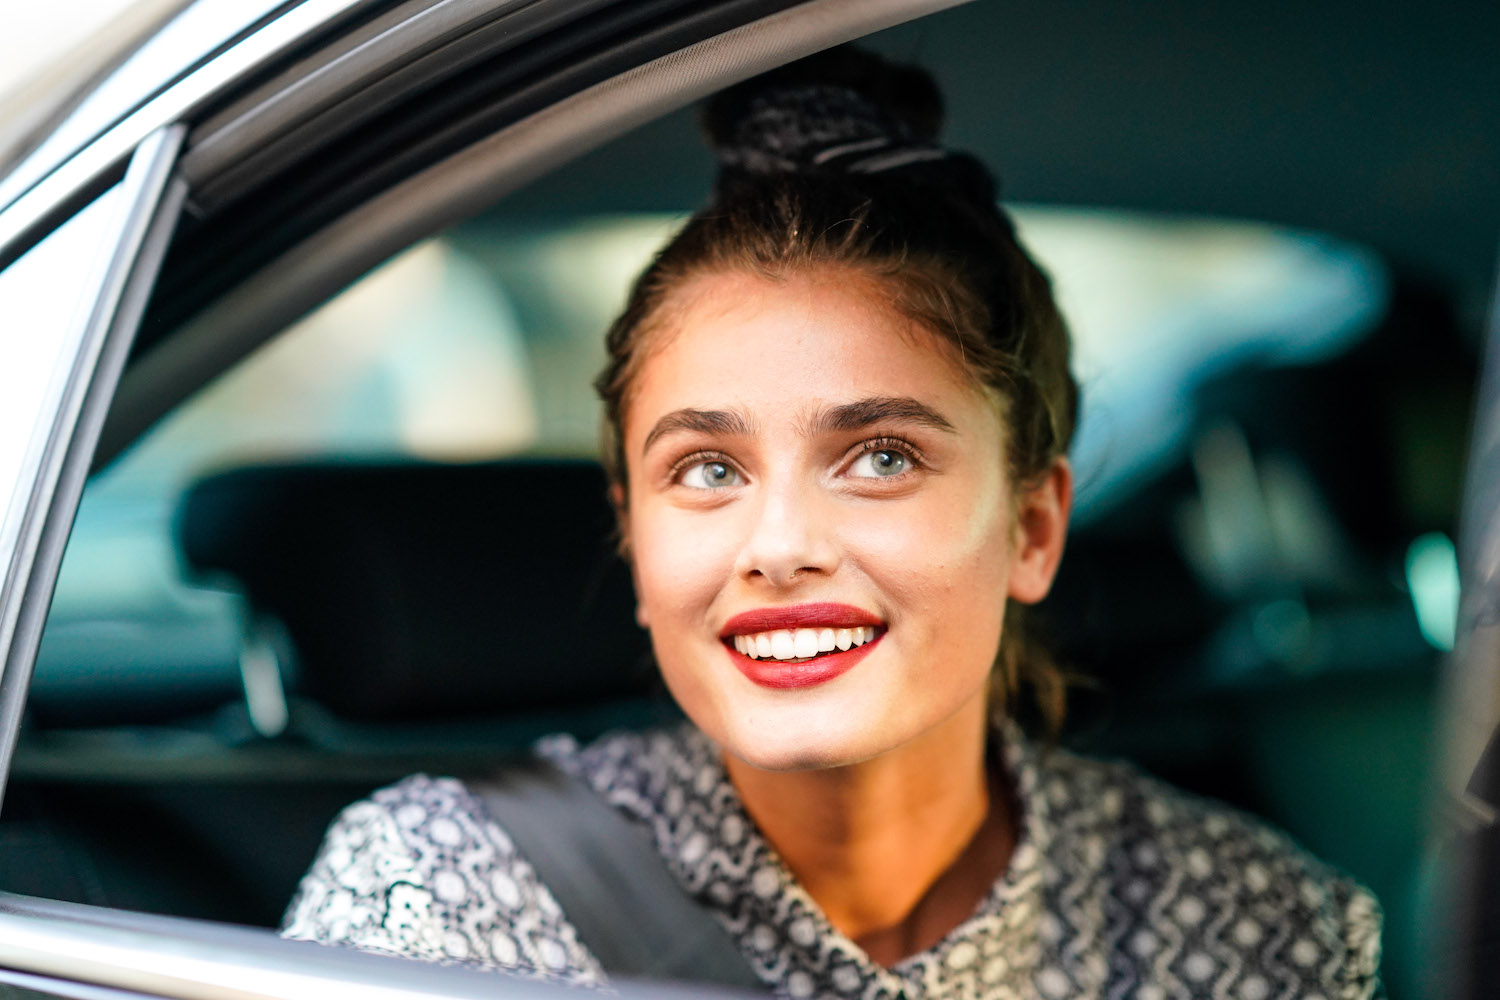 Women are mainly responsible for the decision to purchase a car